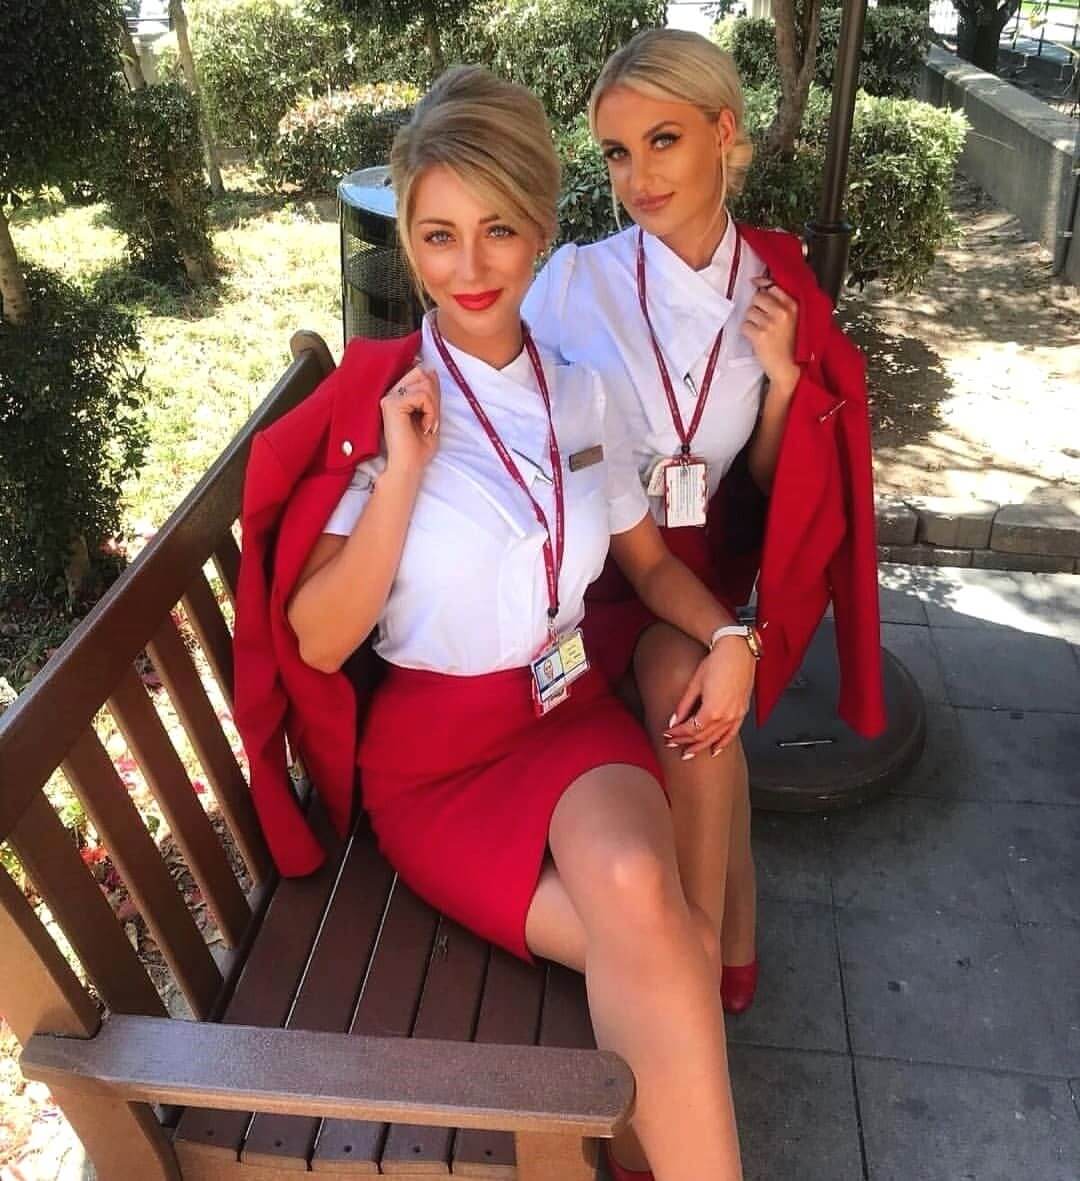 The Shockingly Raunchy Snaps Taken By Some Of Hottest Female Cabin Crew In The World! 337